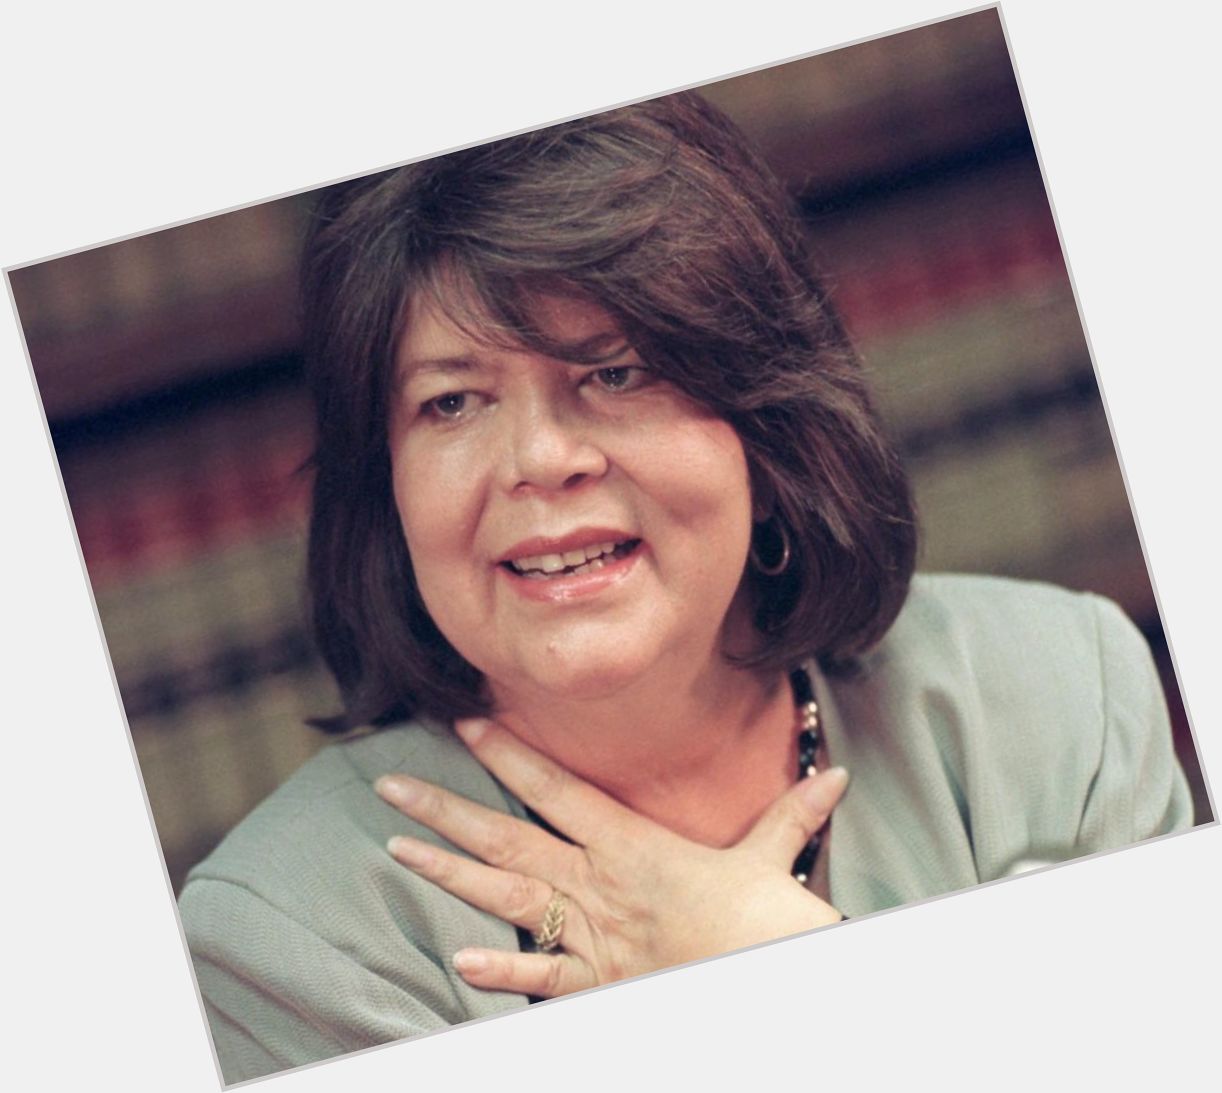 Wilma Mankiller (Nov18, 1945 Apr6, 2010) was the 1st female Chief of the Cherokee Nation. Happy Birthday Wilma!! <3 